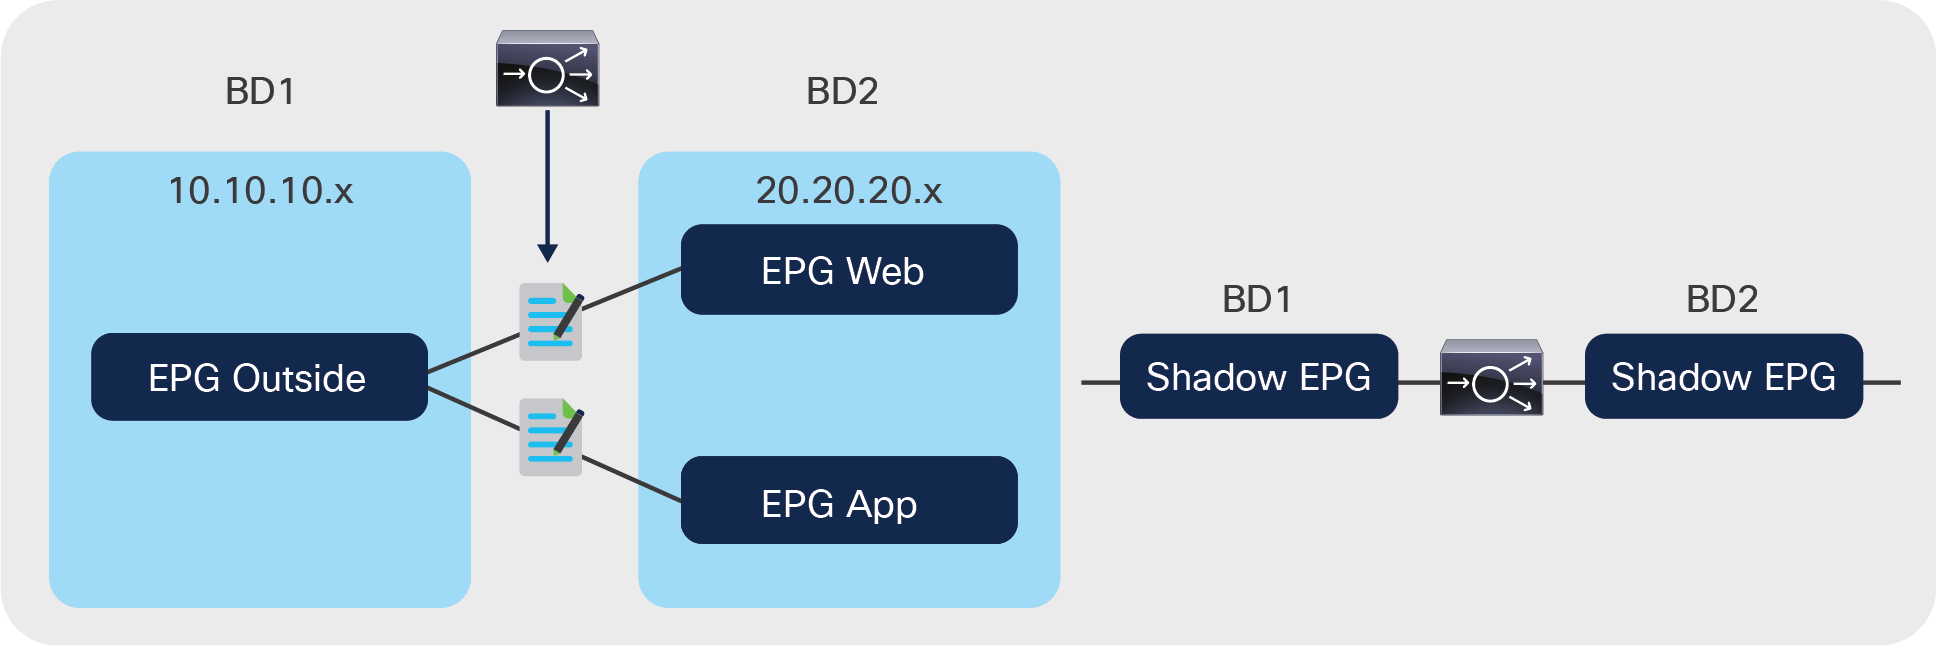 When the service graph is used between multiple EPGs on two bridge domains, the L4-L7 appliance always is attached to two shadow EPGs